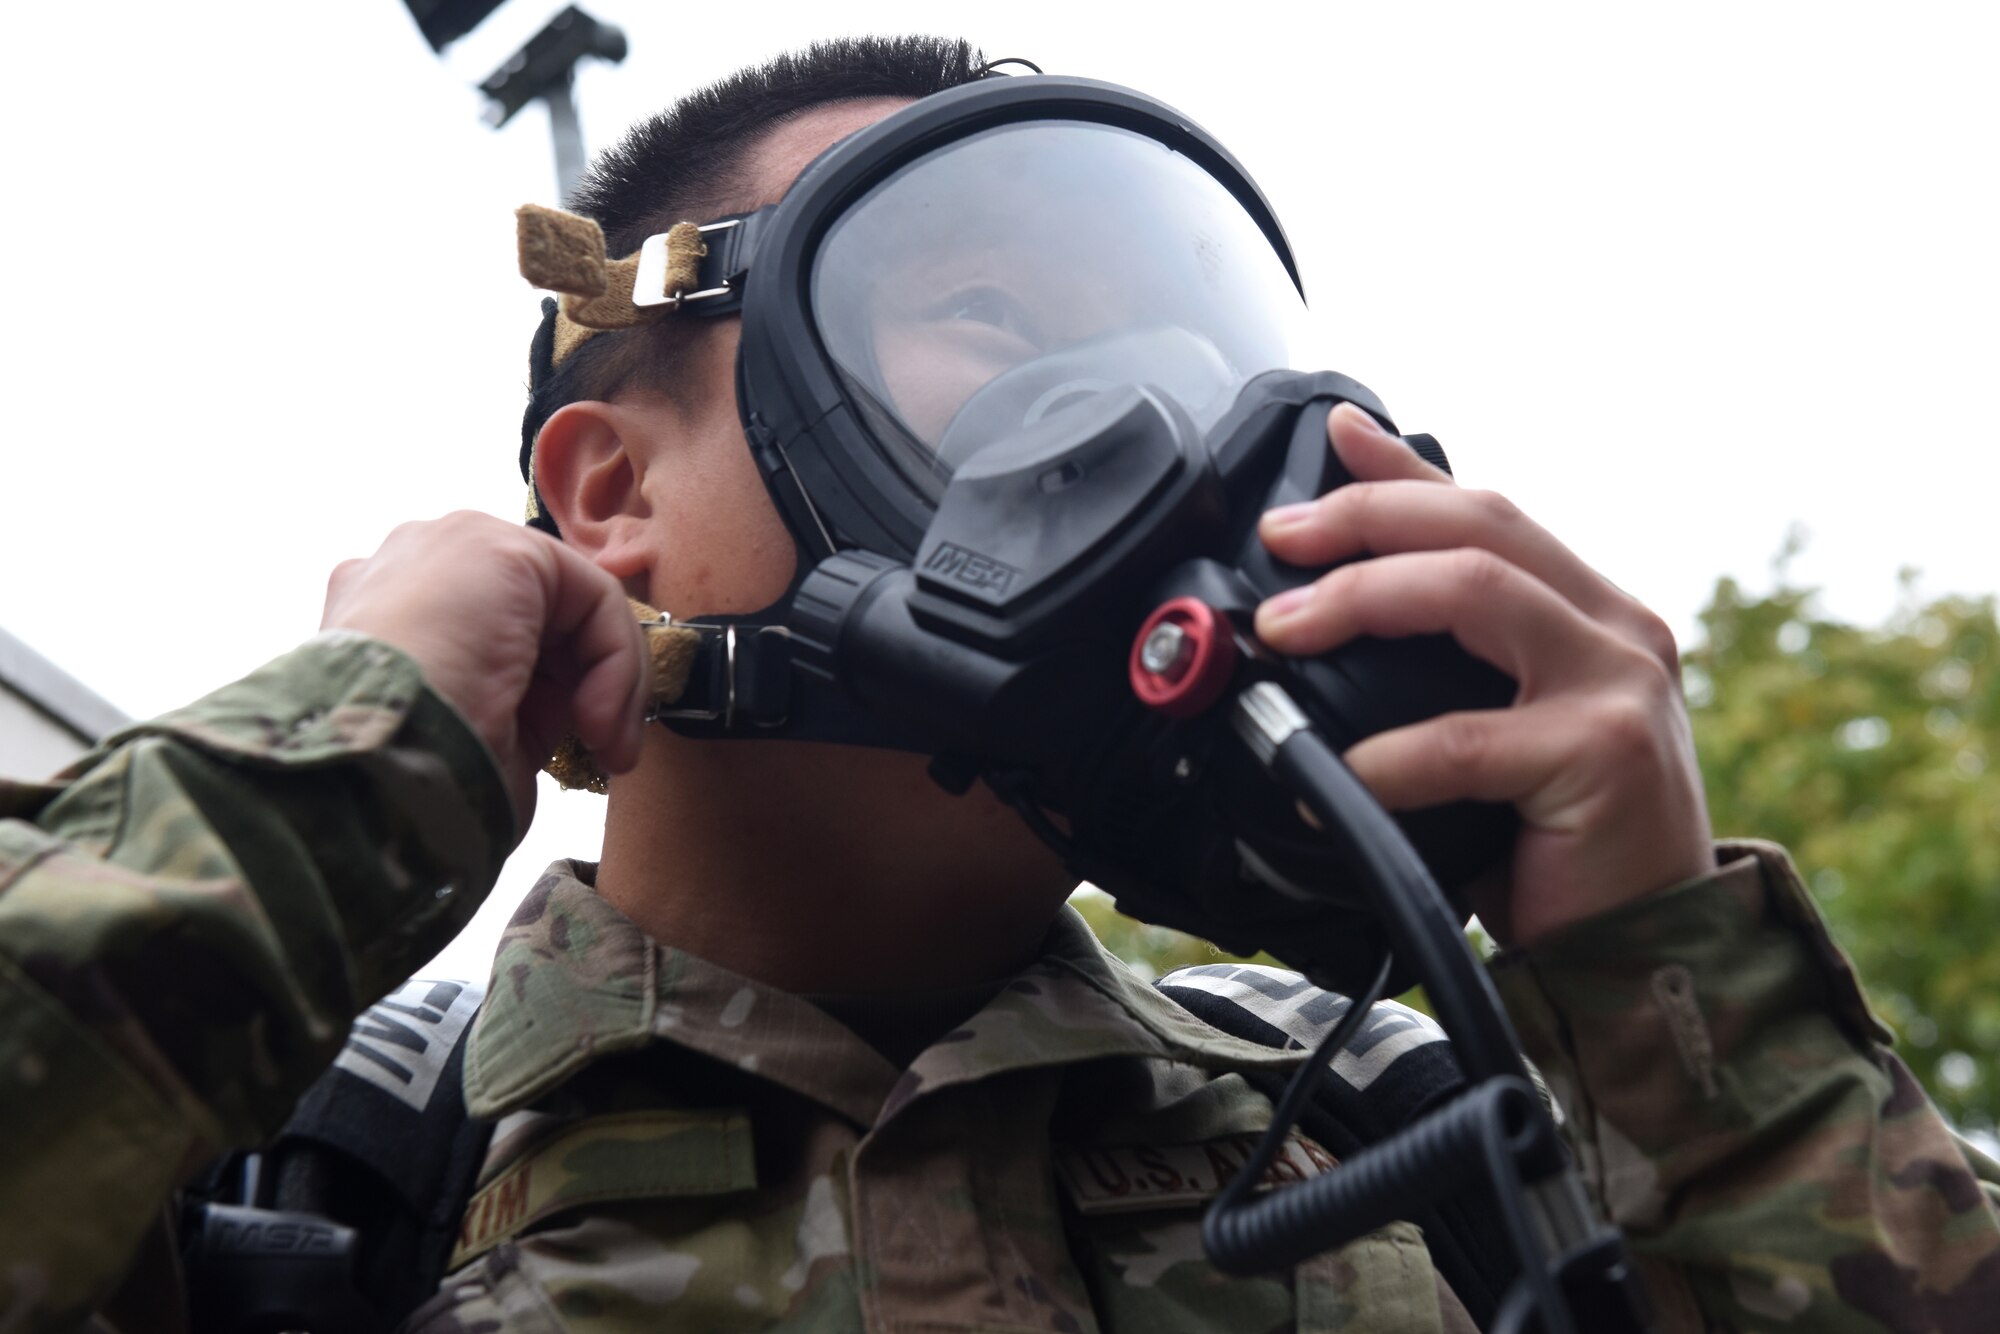 Senior Airman Tyler Kim, bioenvironmental technician assigned to the 48th Aerospace Medicine Squadron, recently demonstrated how to gear up at Royal Air Force Lakenheath, England. A Self-Contained Breathing Apparatus is used to provide breathable air in emergency situations that are dangerous to life or the health atmosphere. (U.S. Air Force photo by Airman 1st Class Rhonda Smith)